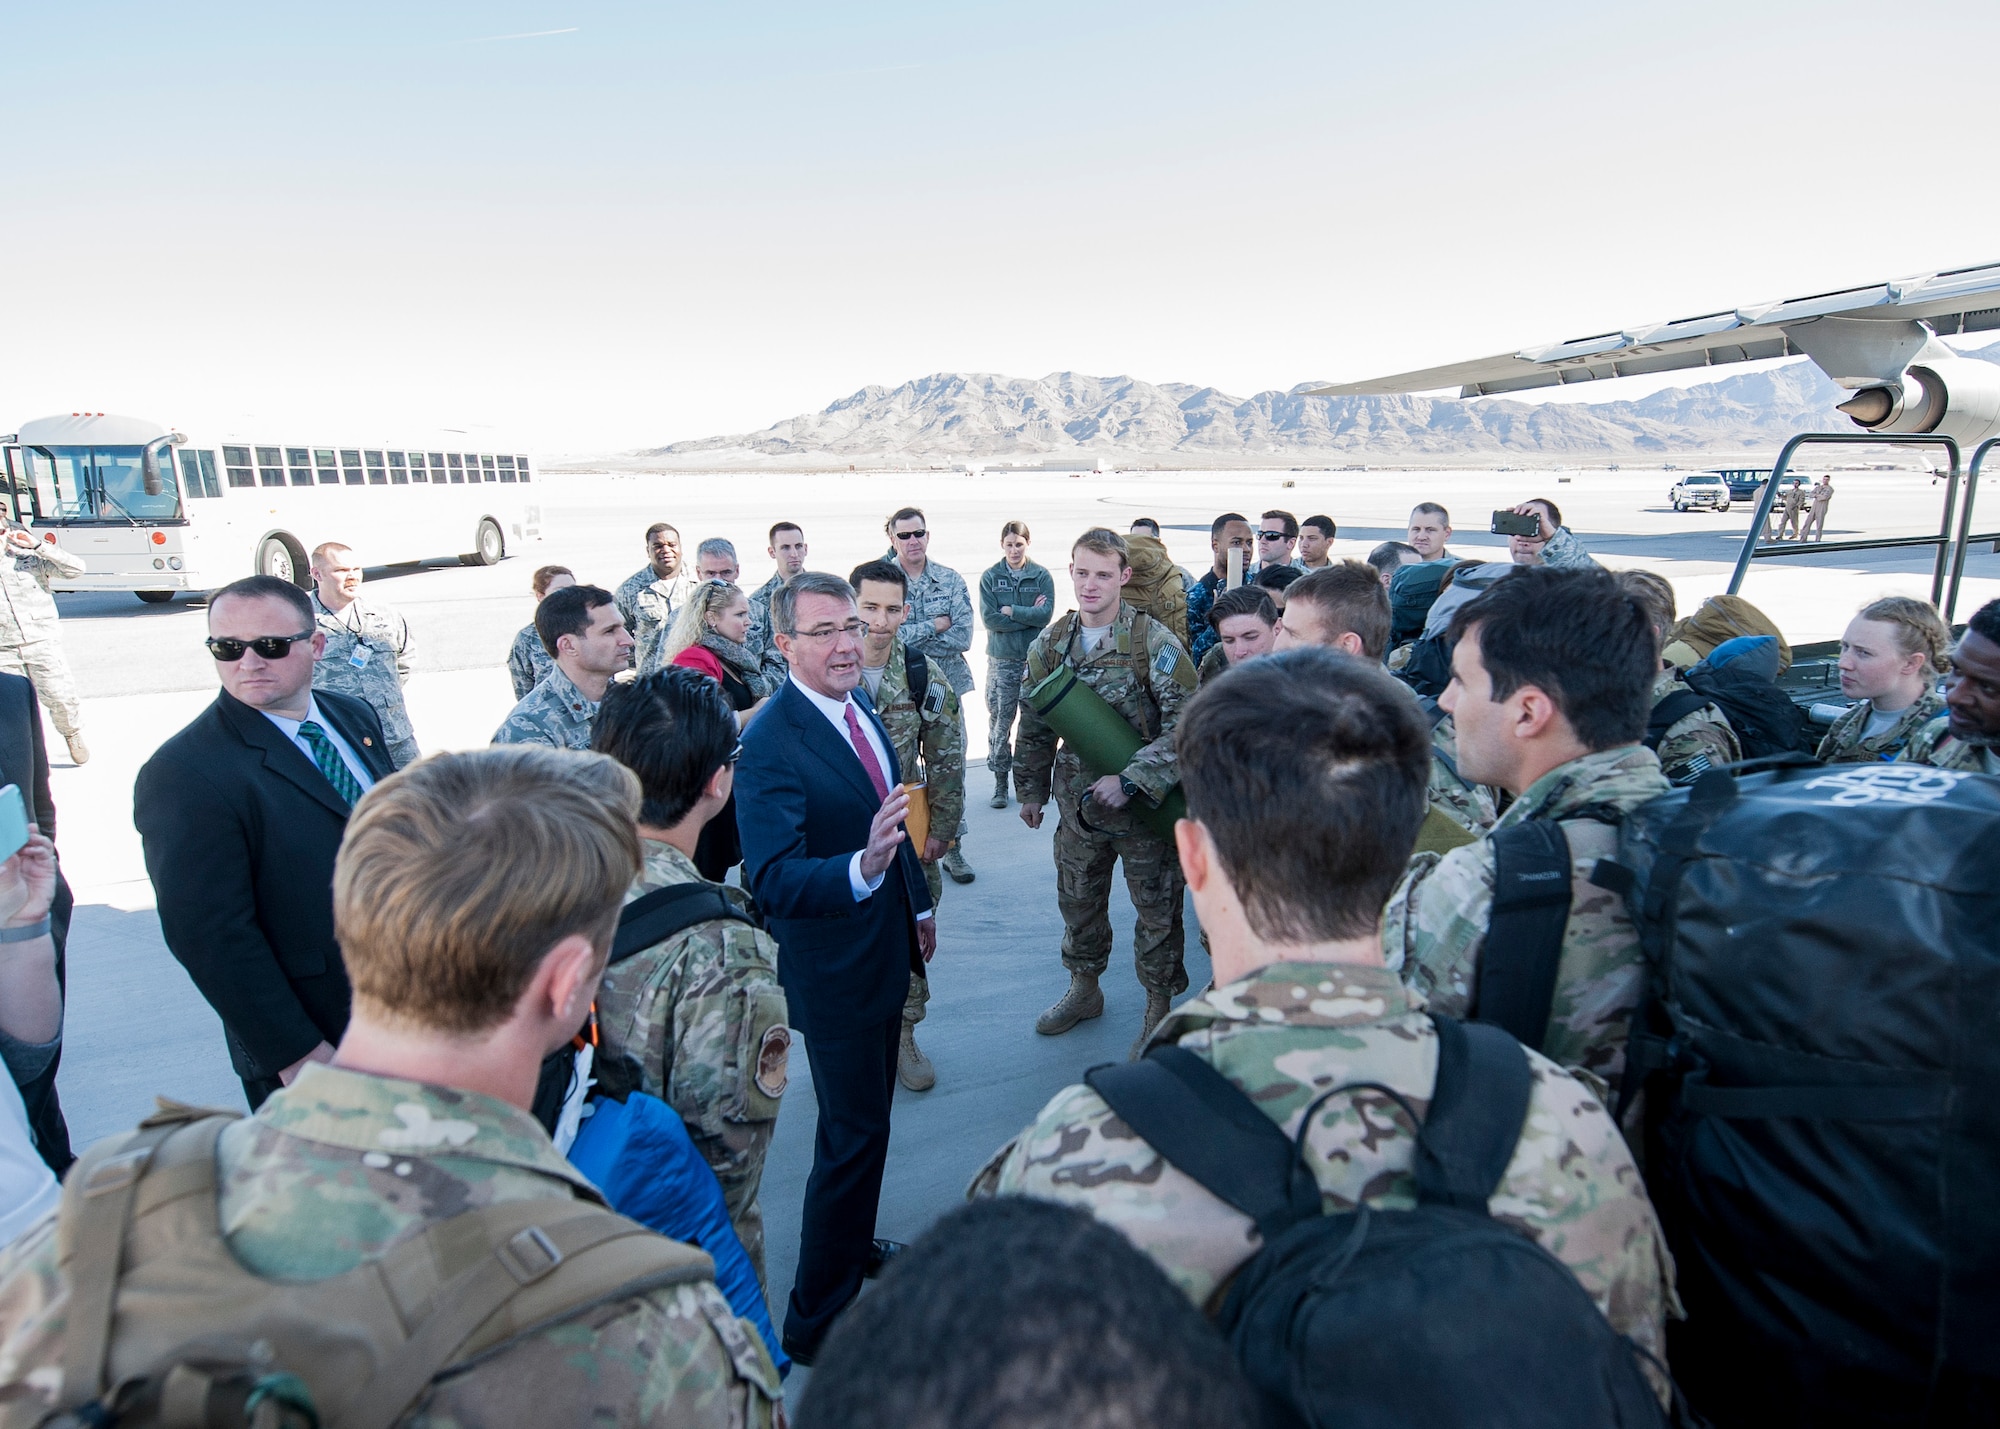 Defense Secretary Ash Carter speaks to Airmen returning from deployment at Nellis Air Force Base, Nev., Feb. 4, 2016. On his way to depart the base, Carter noticed a C-5 Galaxy where Airmen were coming off the aircraft, returning from deployment. So, he took a 20-minute detour to personally welcome home all of the returning Airmen. (U.S. Air Force photo/Staff Sgt. Siuta B. Ika)